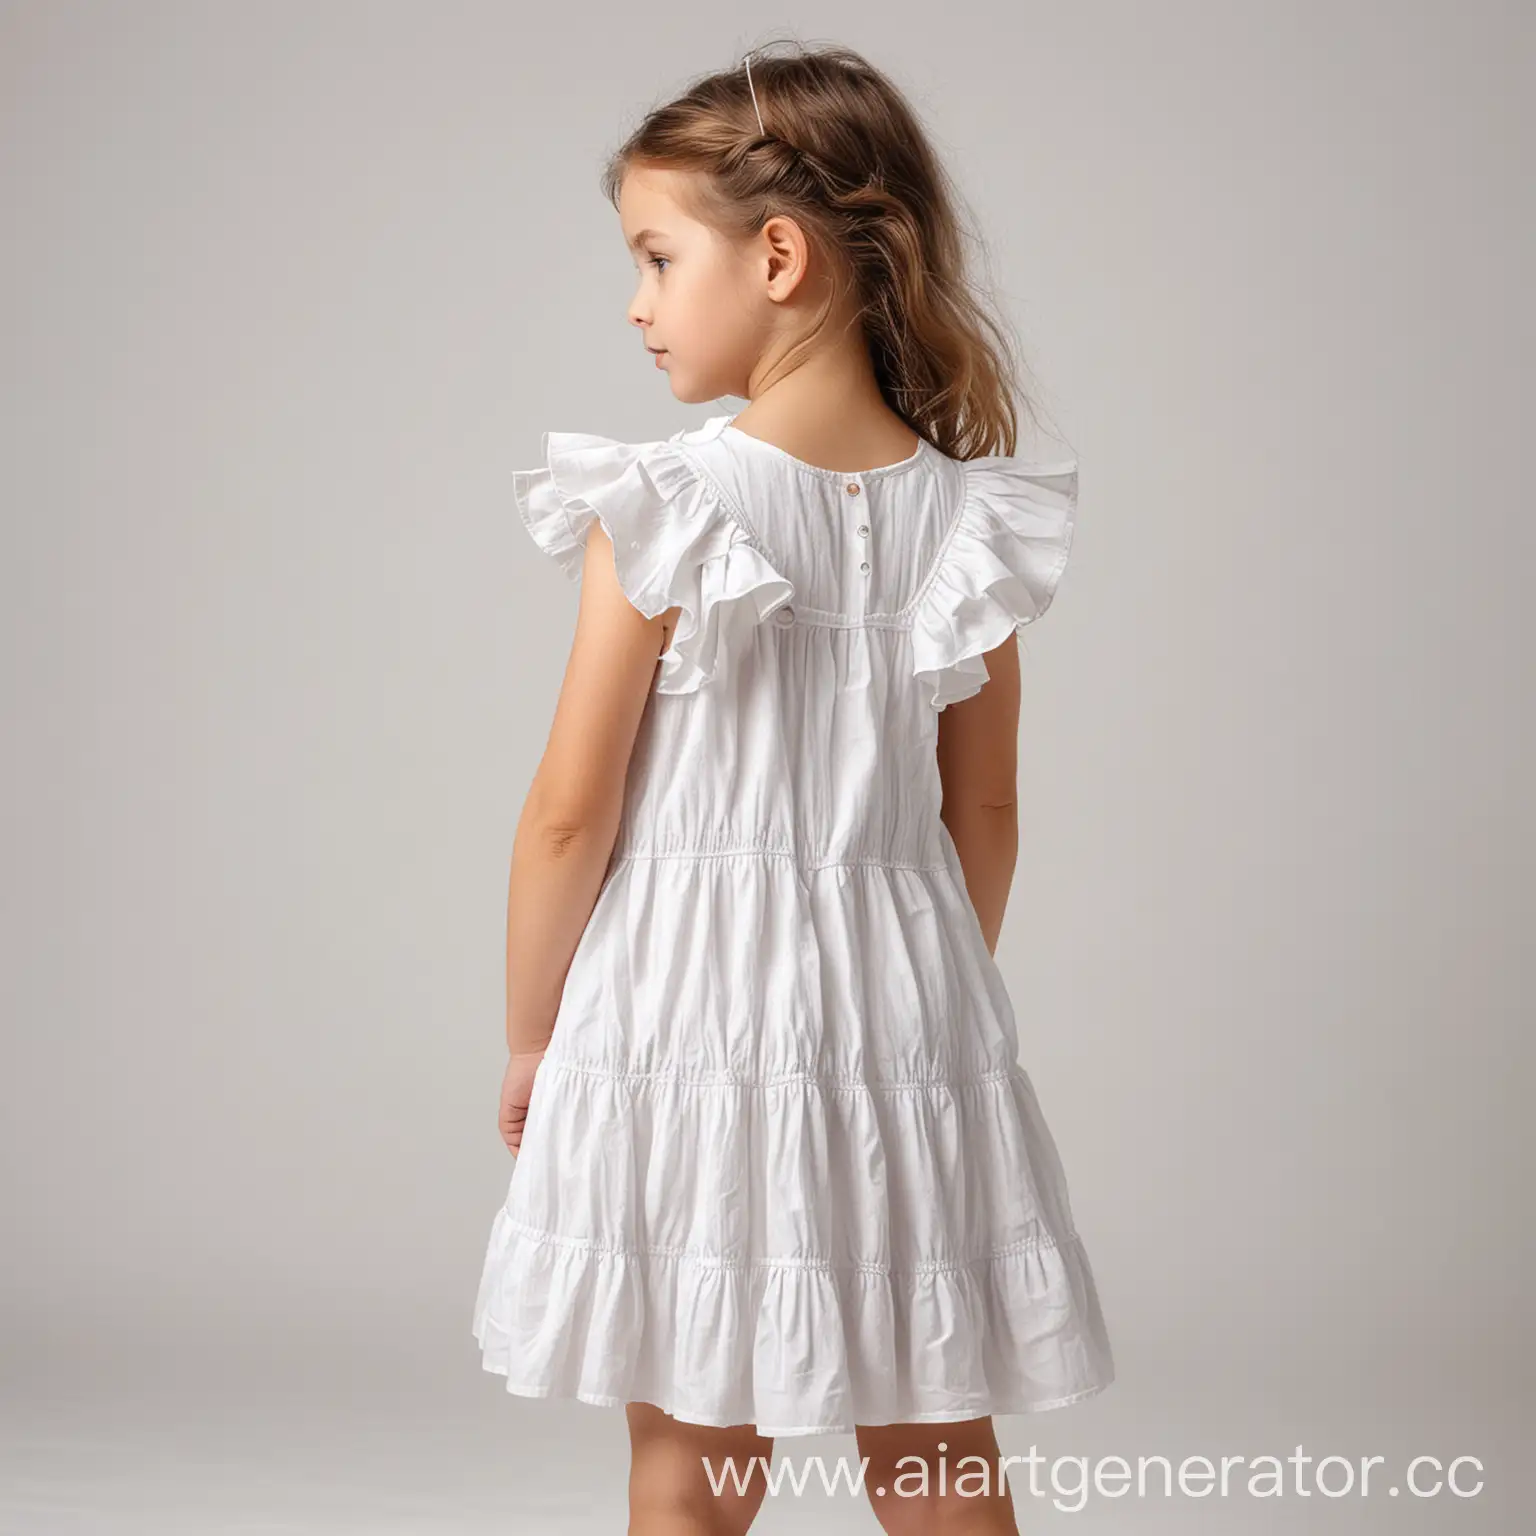 Adorable-Girl-in-White-Summer-Dress-with-Ruffles-on-Clean-White-Background